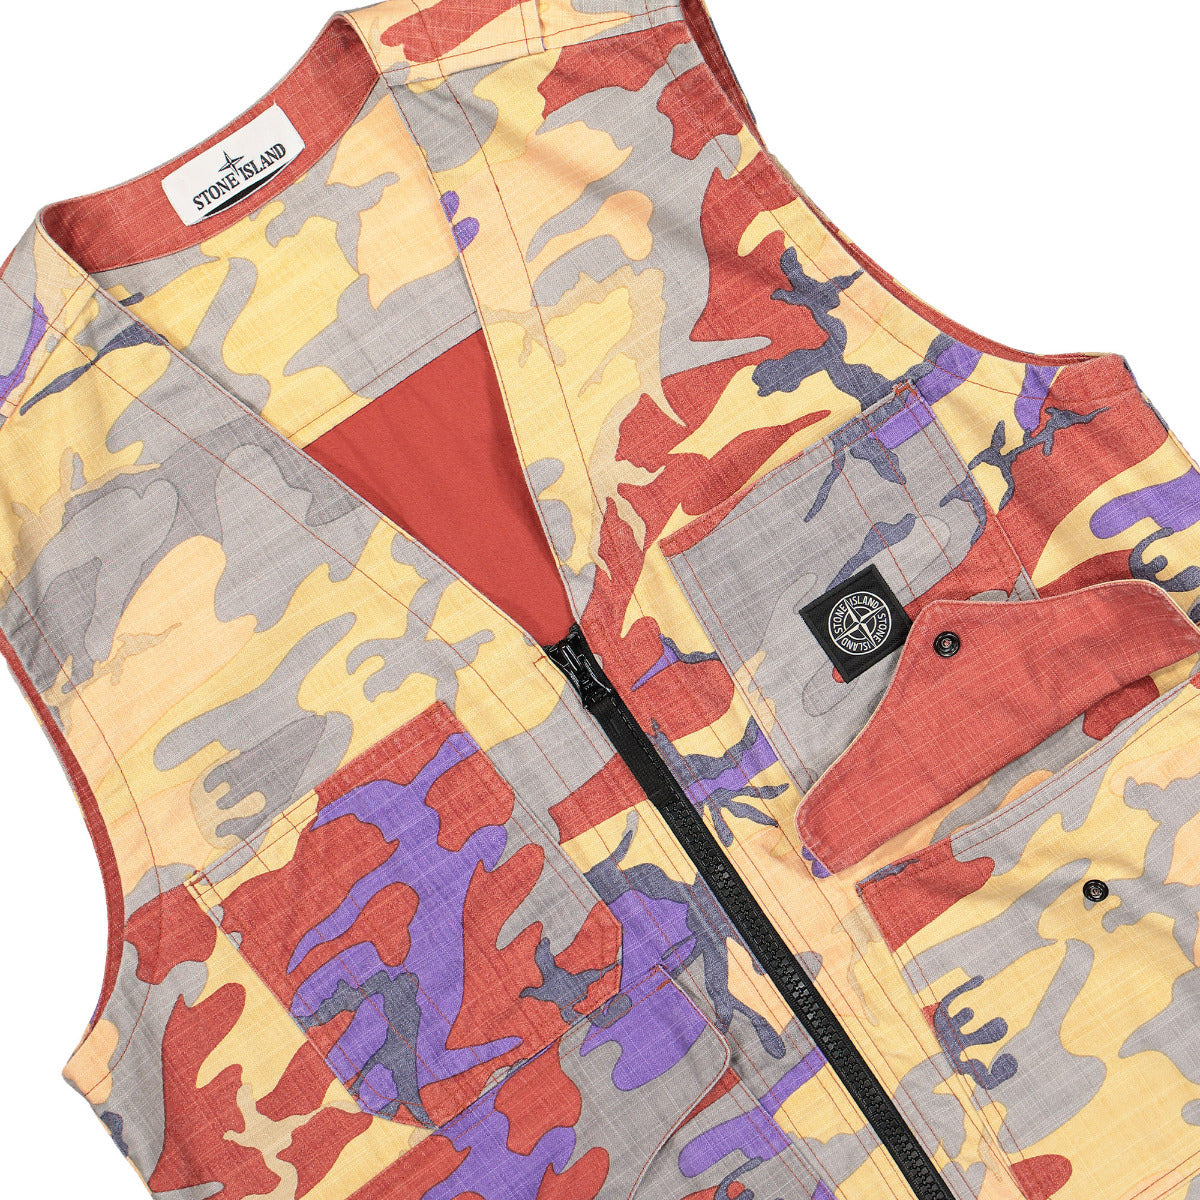 all new island camouflage jerseys and shorts releasing this Friday